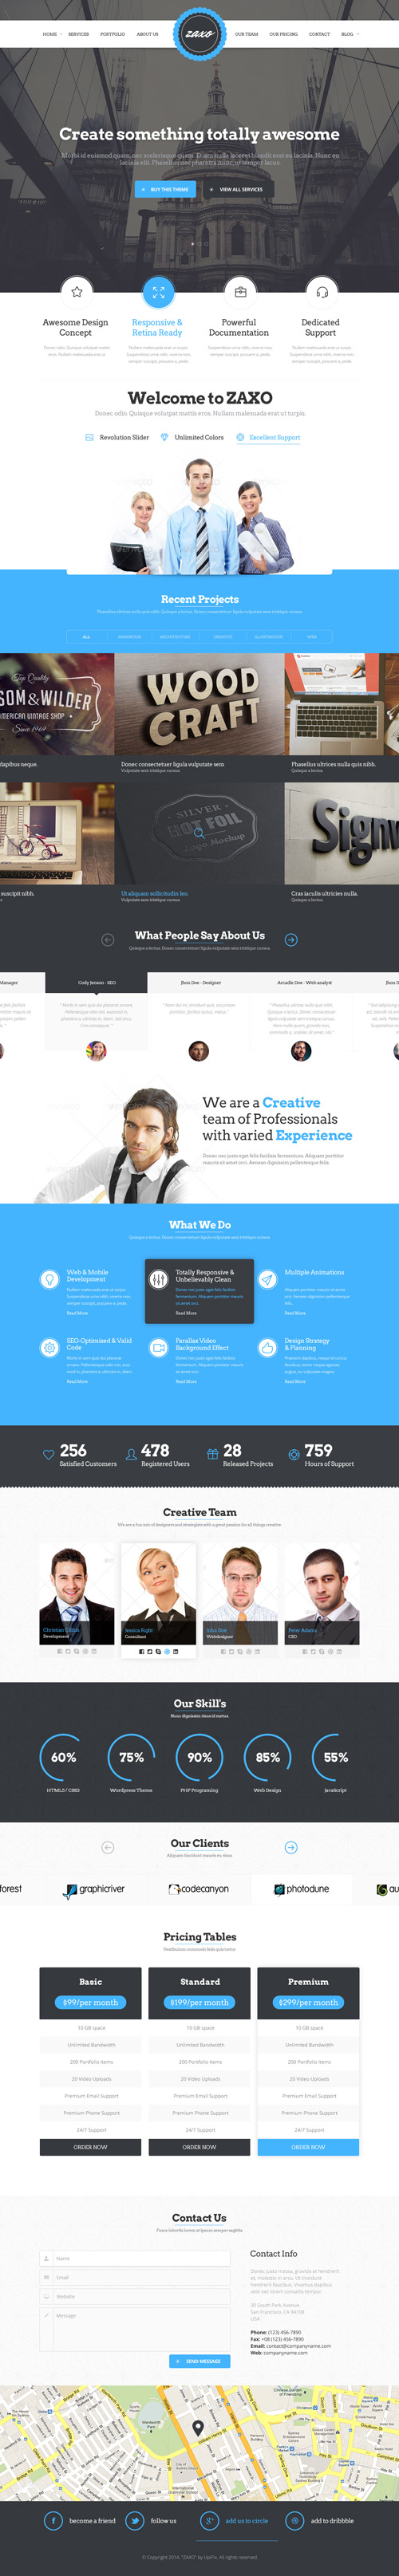 ZAXO - One Page PSD Template